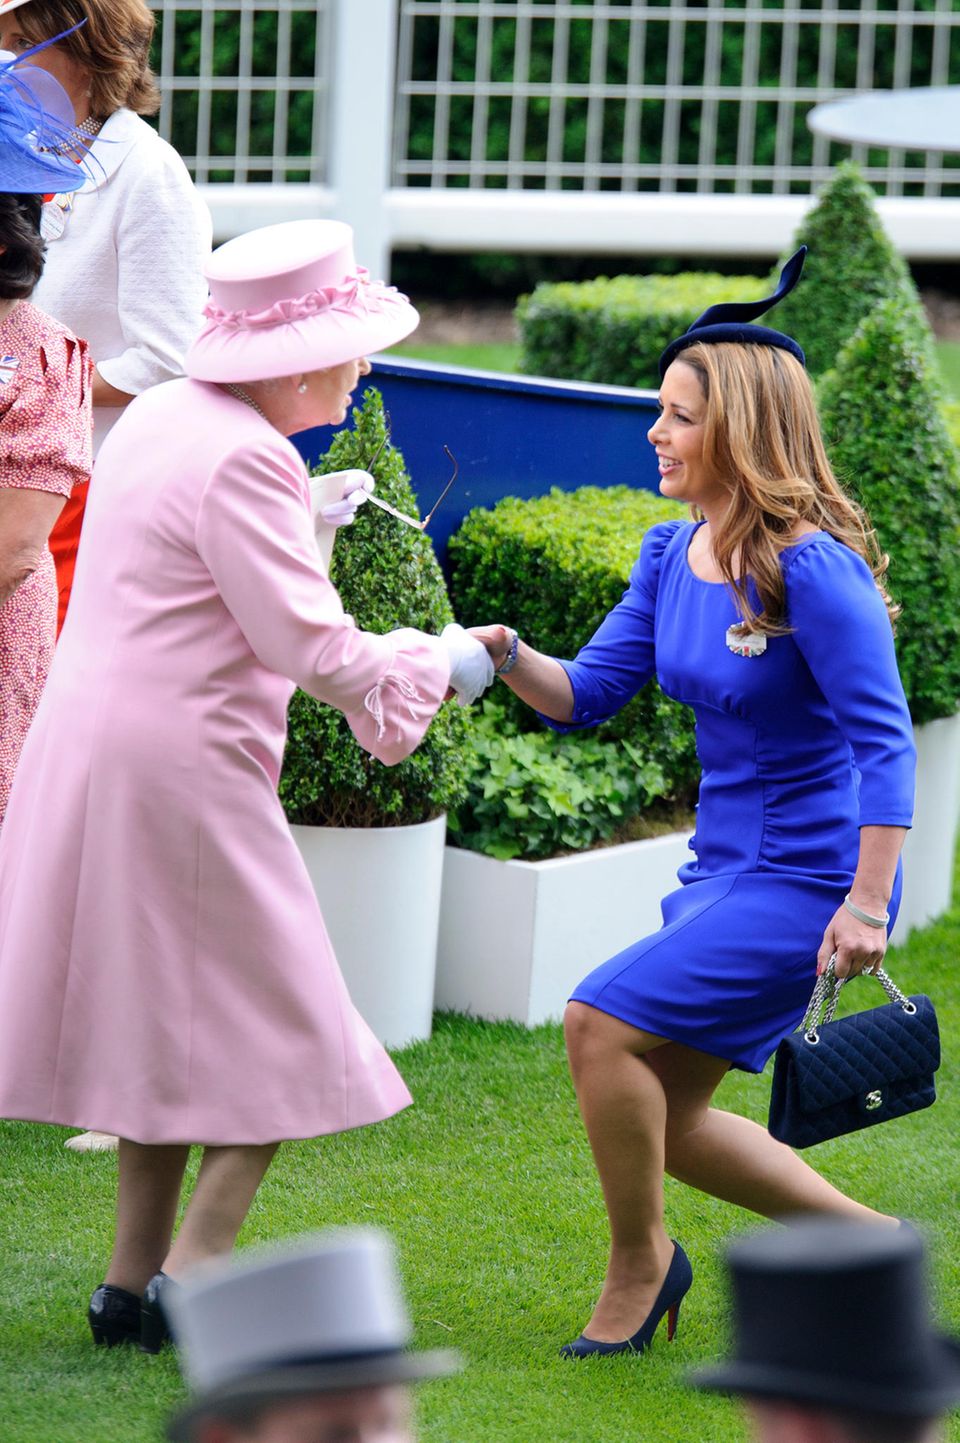 Queen Elizabeth (†) and Princess Haya bint Al Hussein attend Day Two of Royal Ascot on June 20, 2012 in Ascot, England.